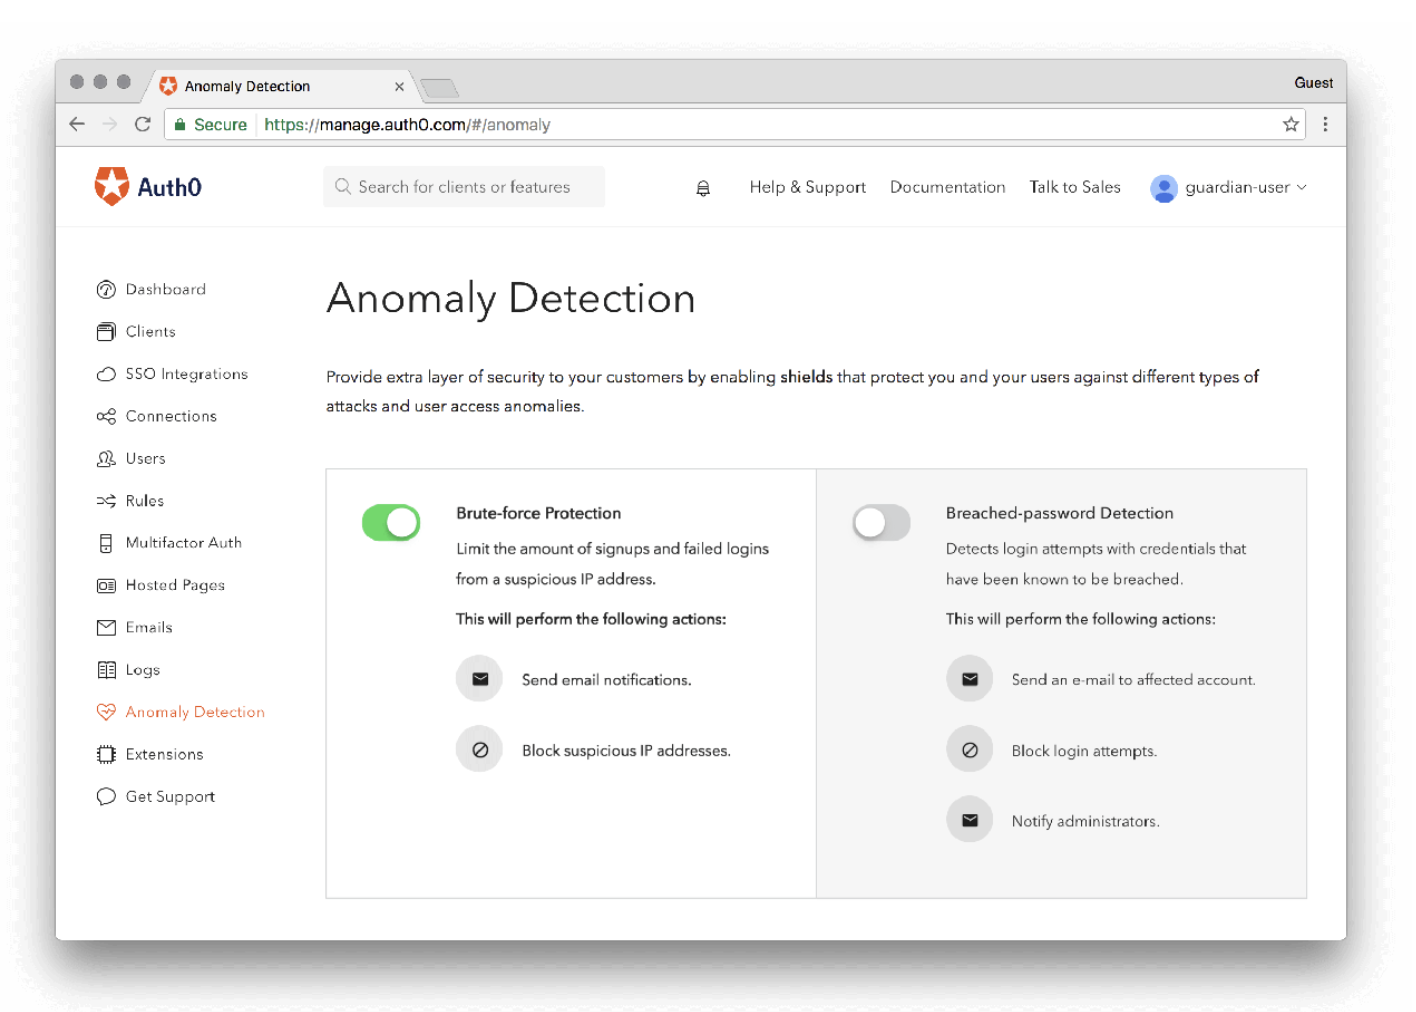 Auth0 Anomaly Detection view in the dashboard